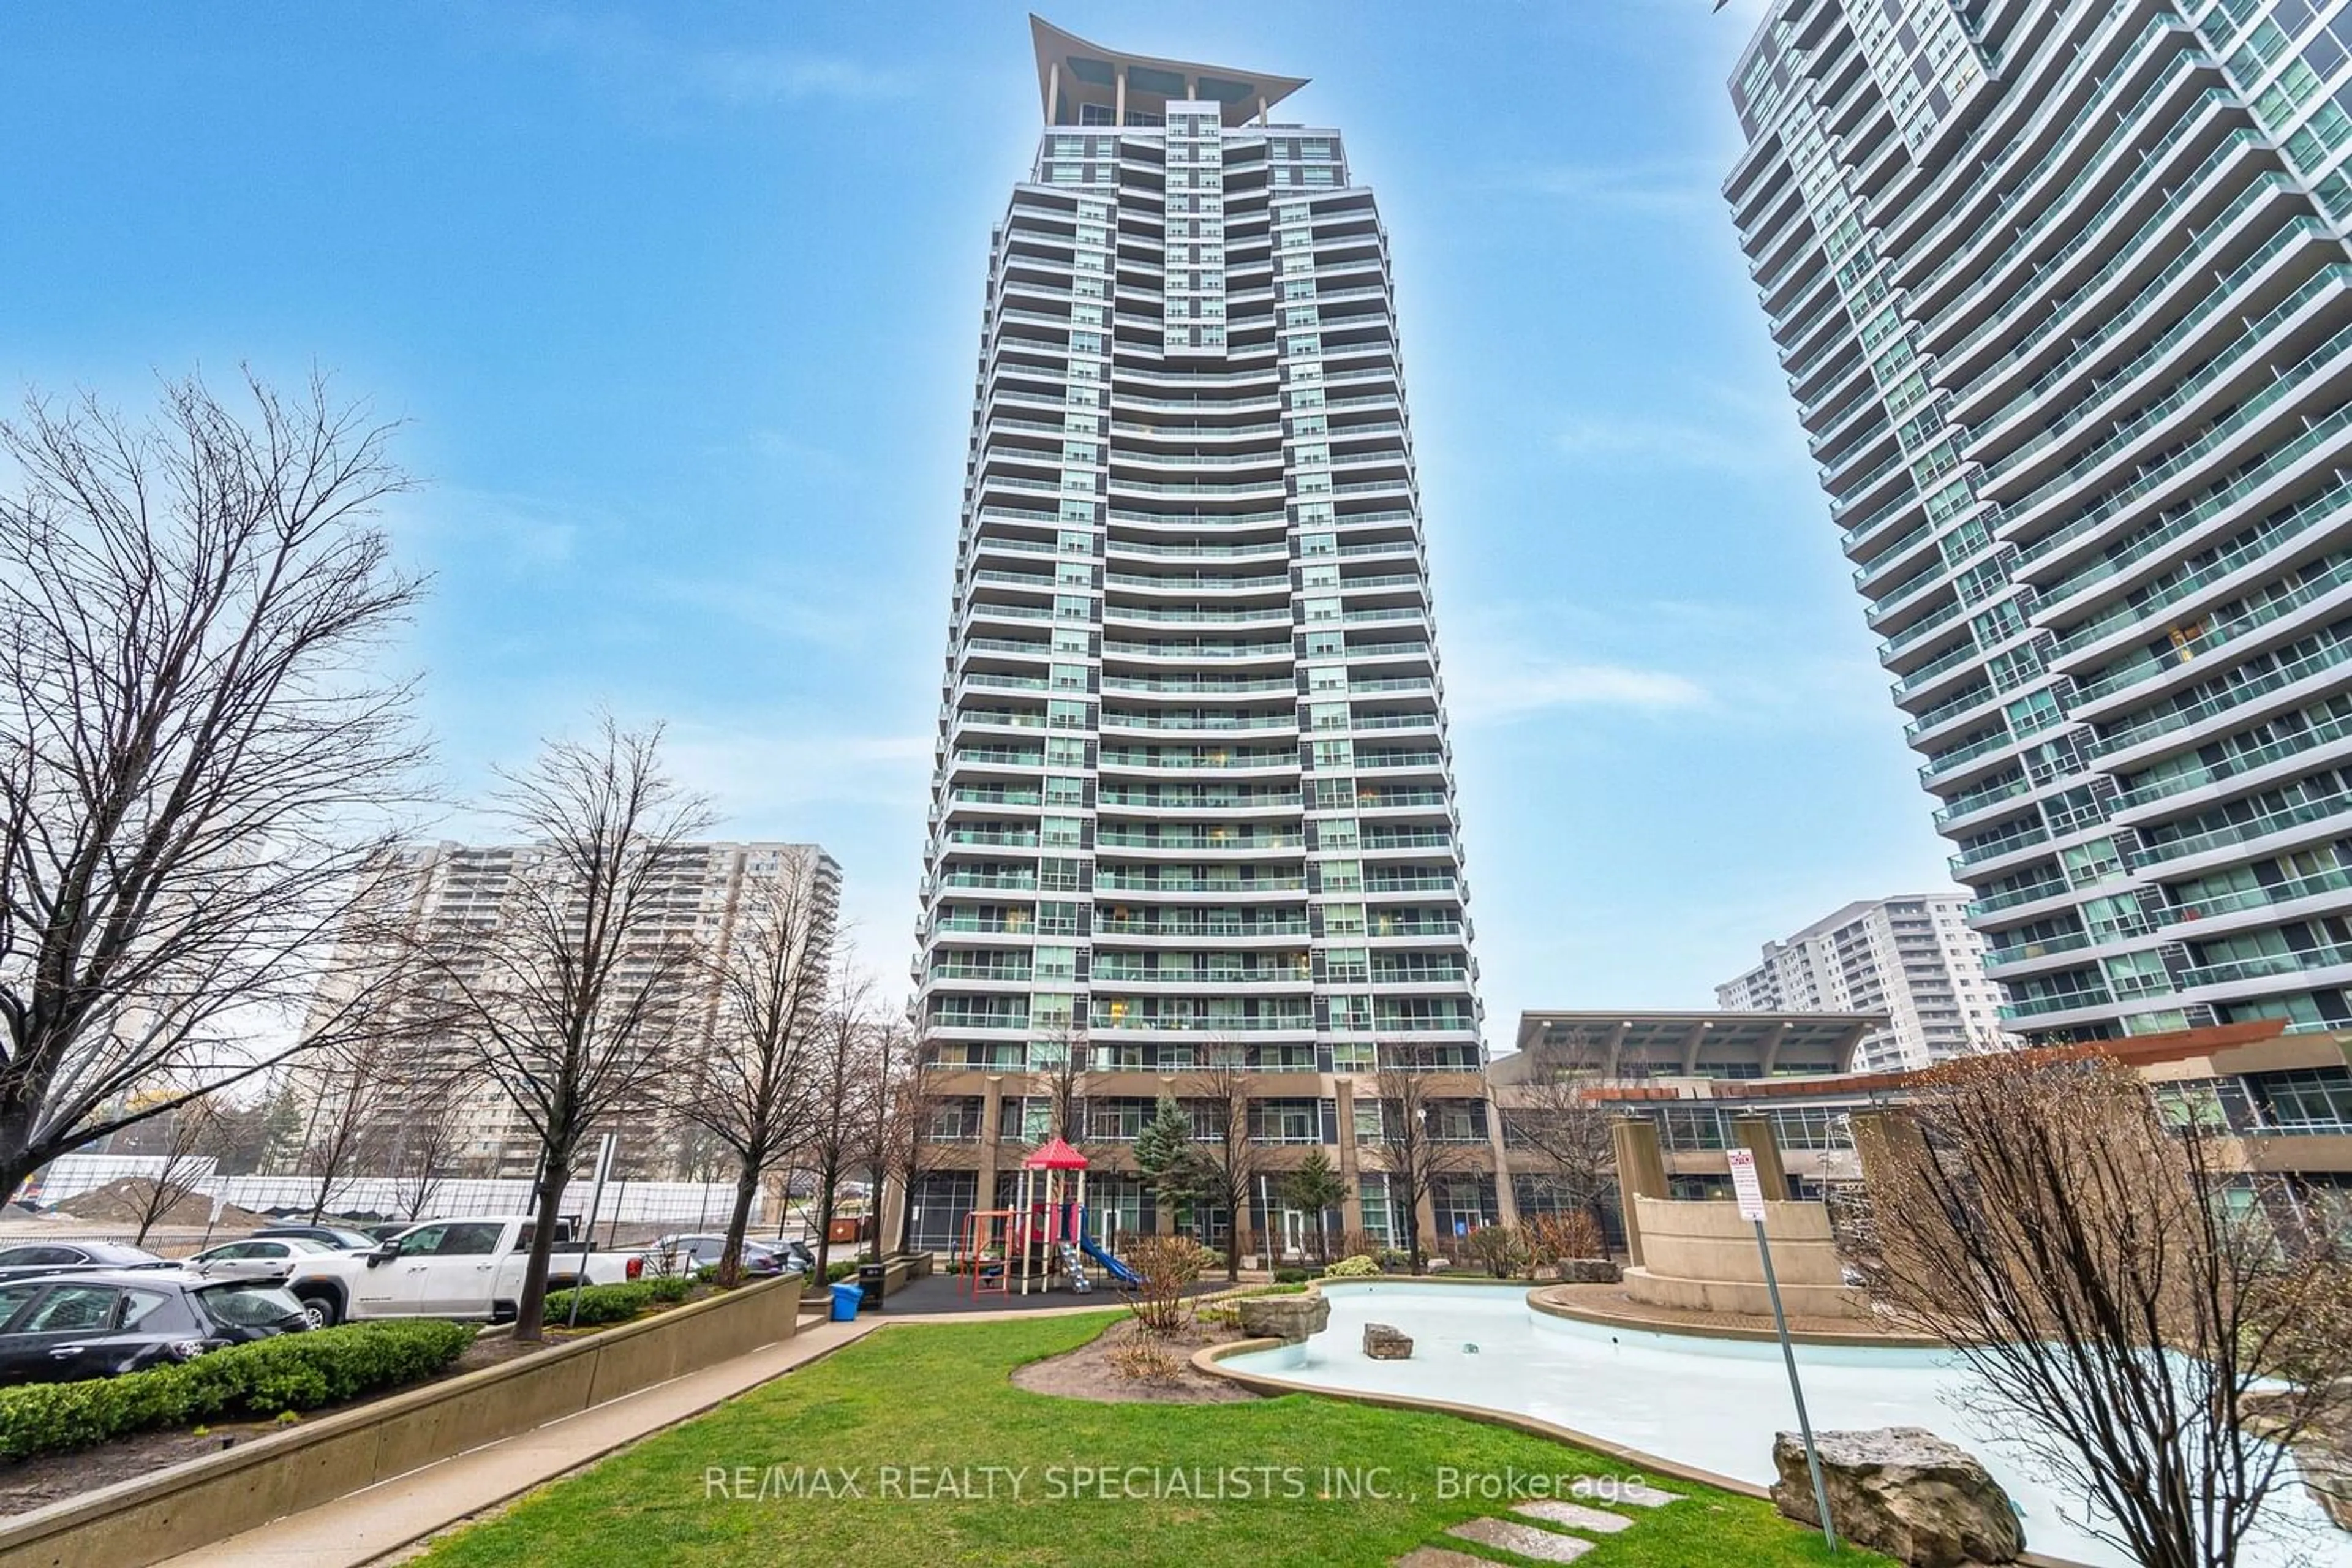 A pic from exterior of the house or condo for 1 Elm Dr #104, Mississauga Ontario L5B 4M1